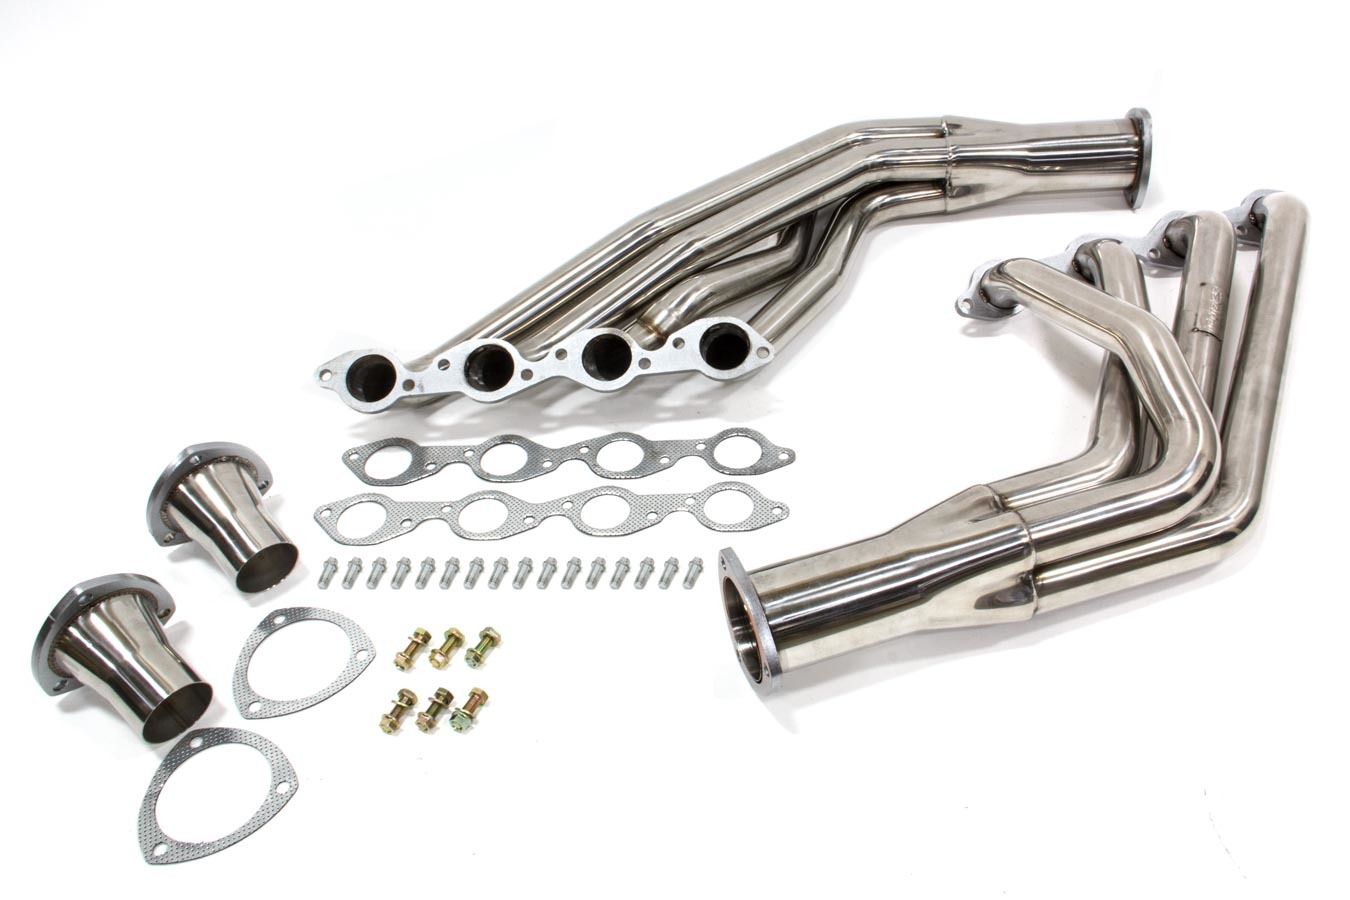 Pypes Exhaust HDR100S Headers, 2 in Primary, 3-1/2 in Collector, Stainless, Natural, Big Block Chevy, GM F-Body / X-Body 1967-74, Pair